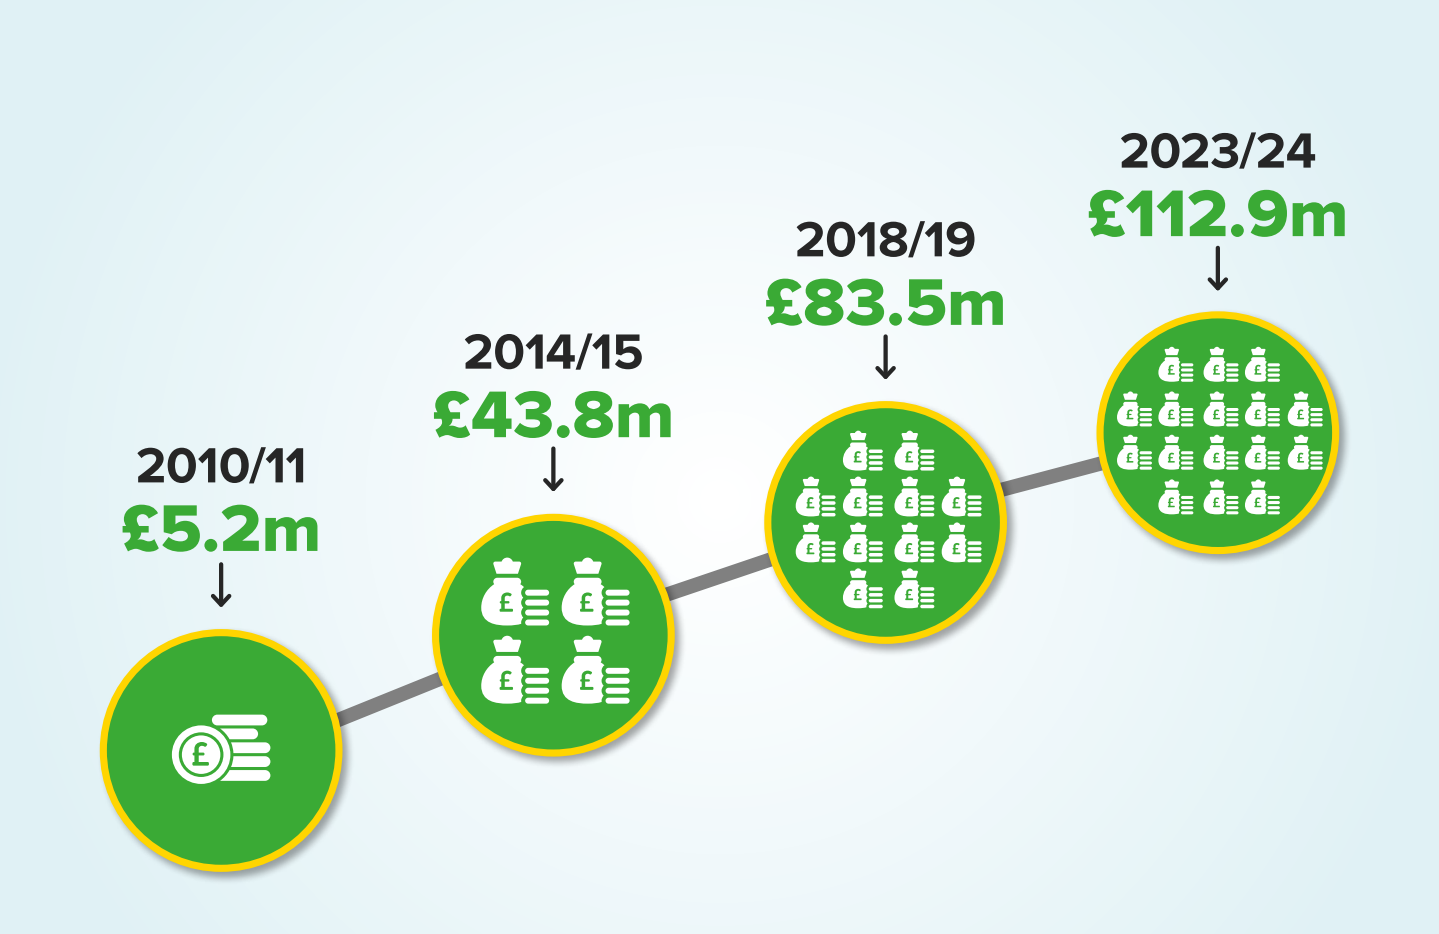  We have delivered more than £102 million in savings since 2011, when the governemnt funding began to reduce. This chart shows our savings of £5.2 million in 2010/11, rising to £43.8 million in 2014/5, £83.5 million in 2018/9 and £112.9 million in 2023/24